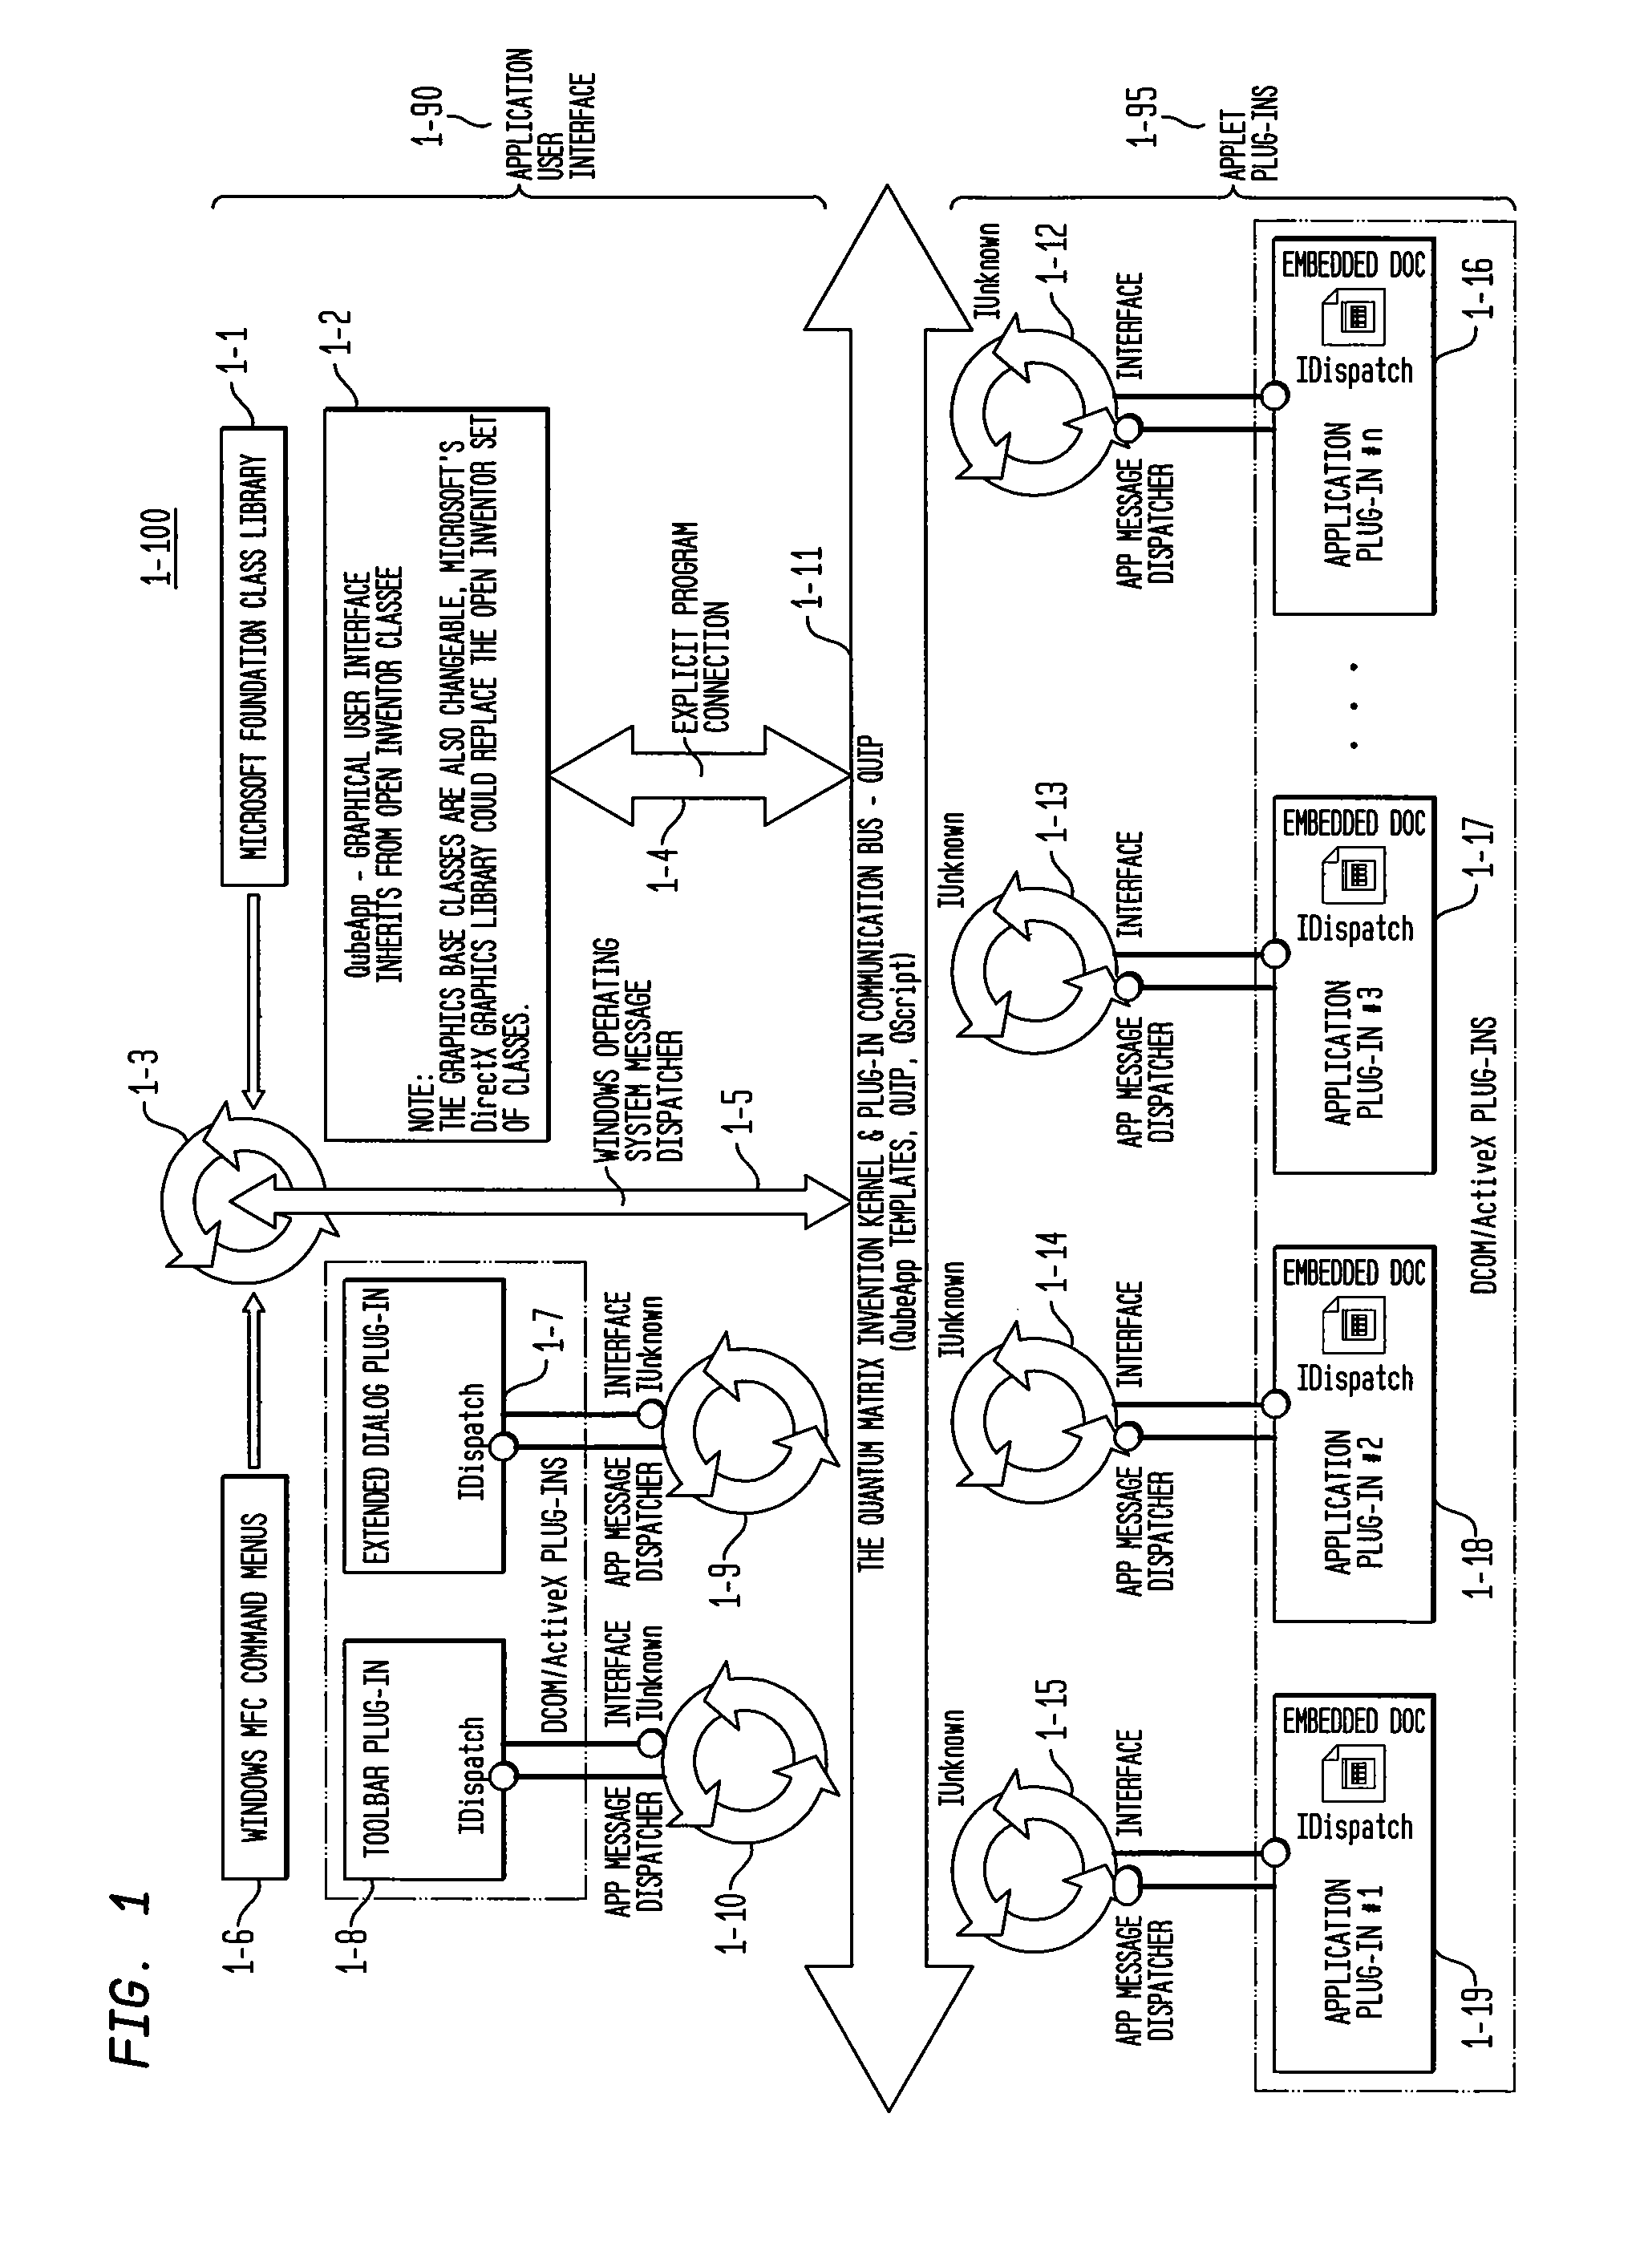 System and method for multi-dimensional organization, management, and manipulation of data